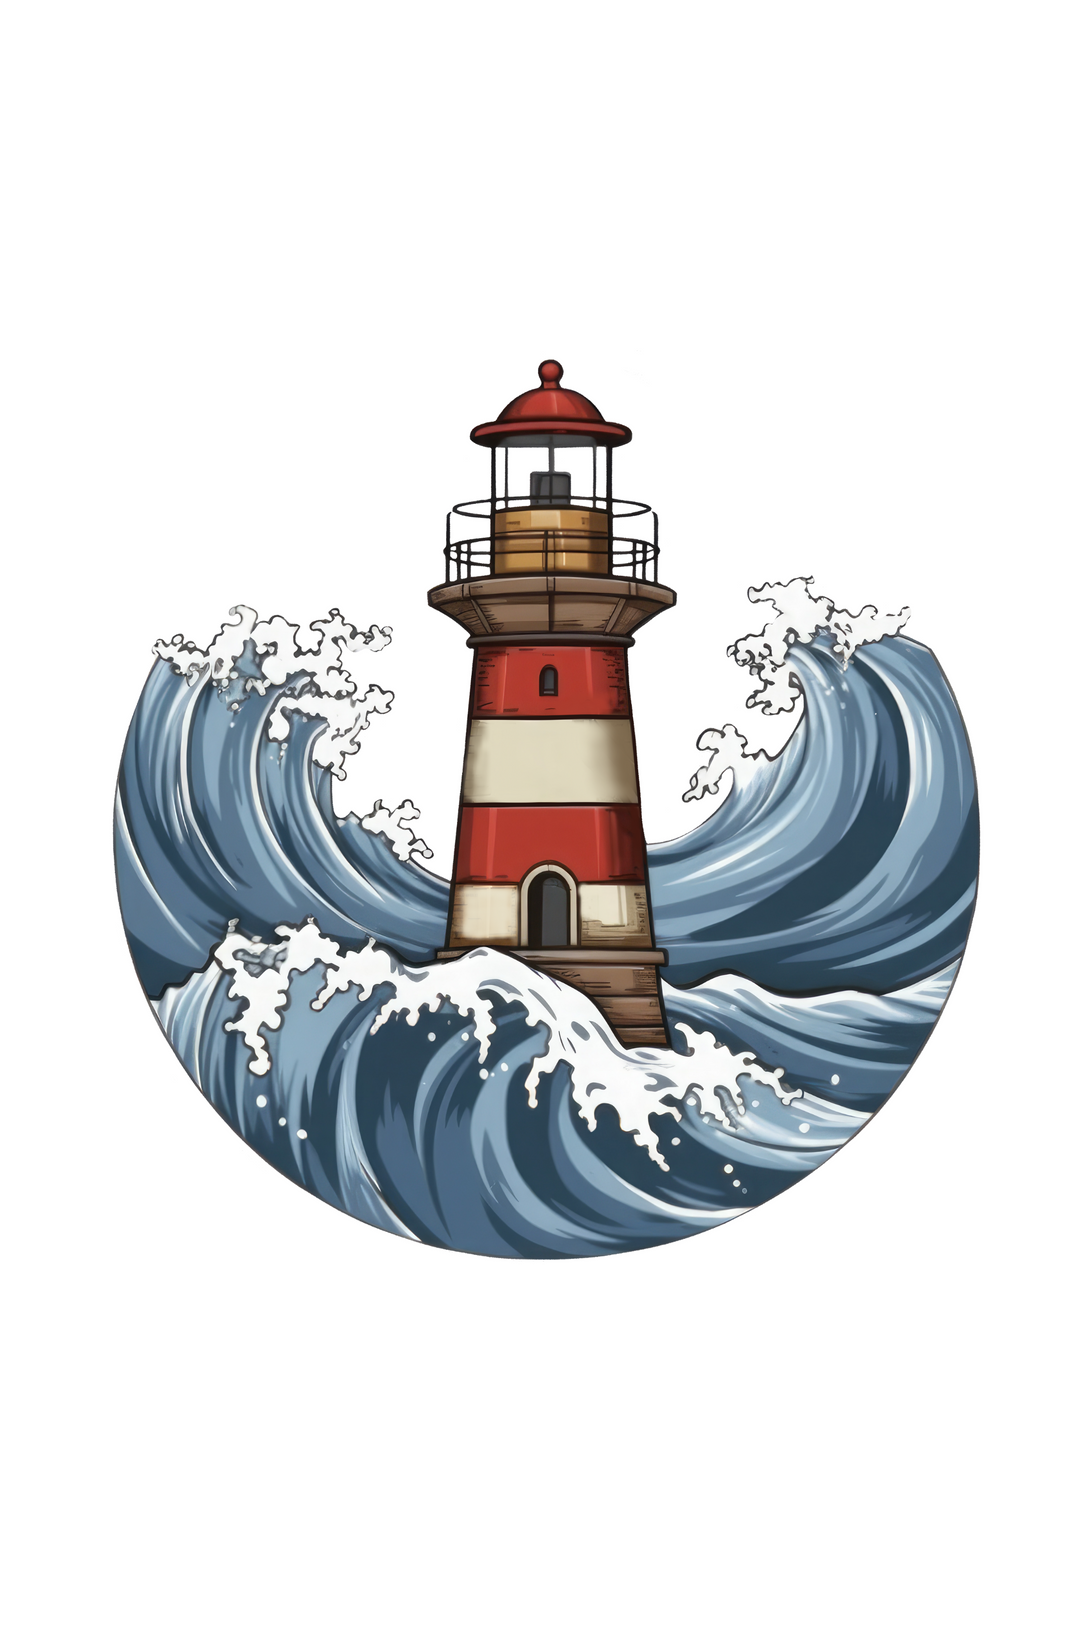 Lighthouse And Waves Printed T-Shirt For Men - WowWaves - 1